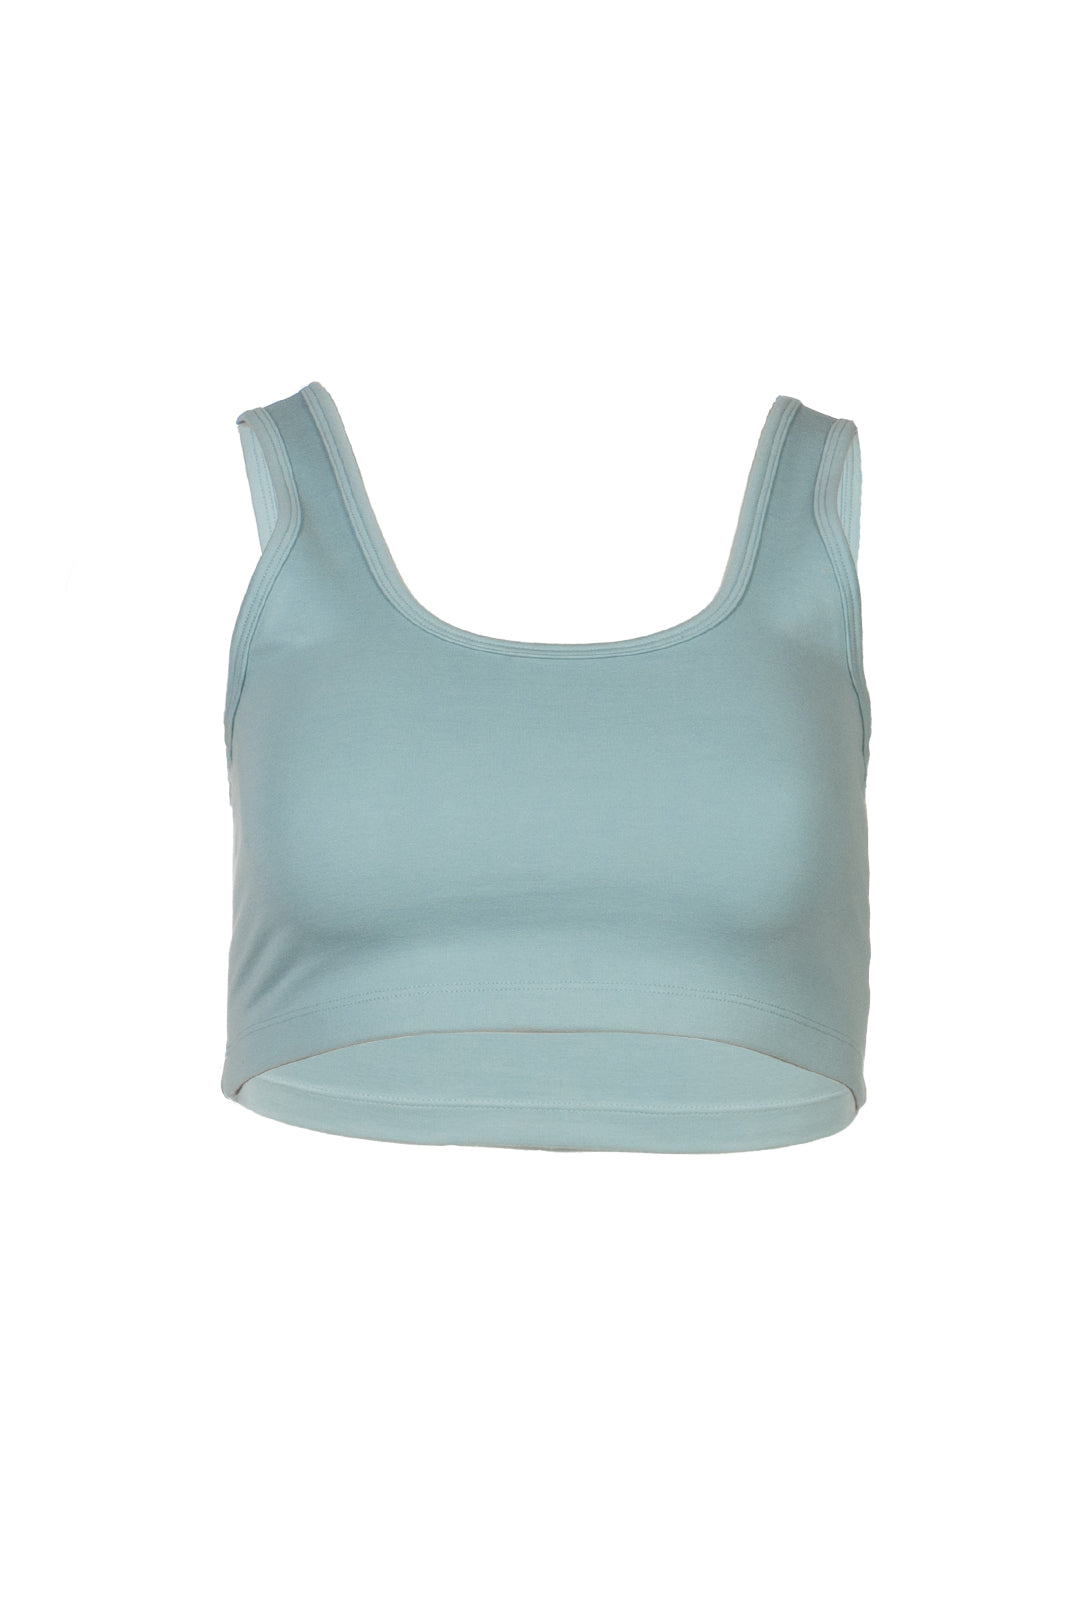 Blue short lounge camisole with rounded square neckline | True